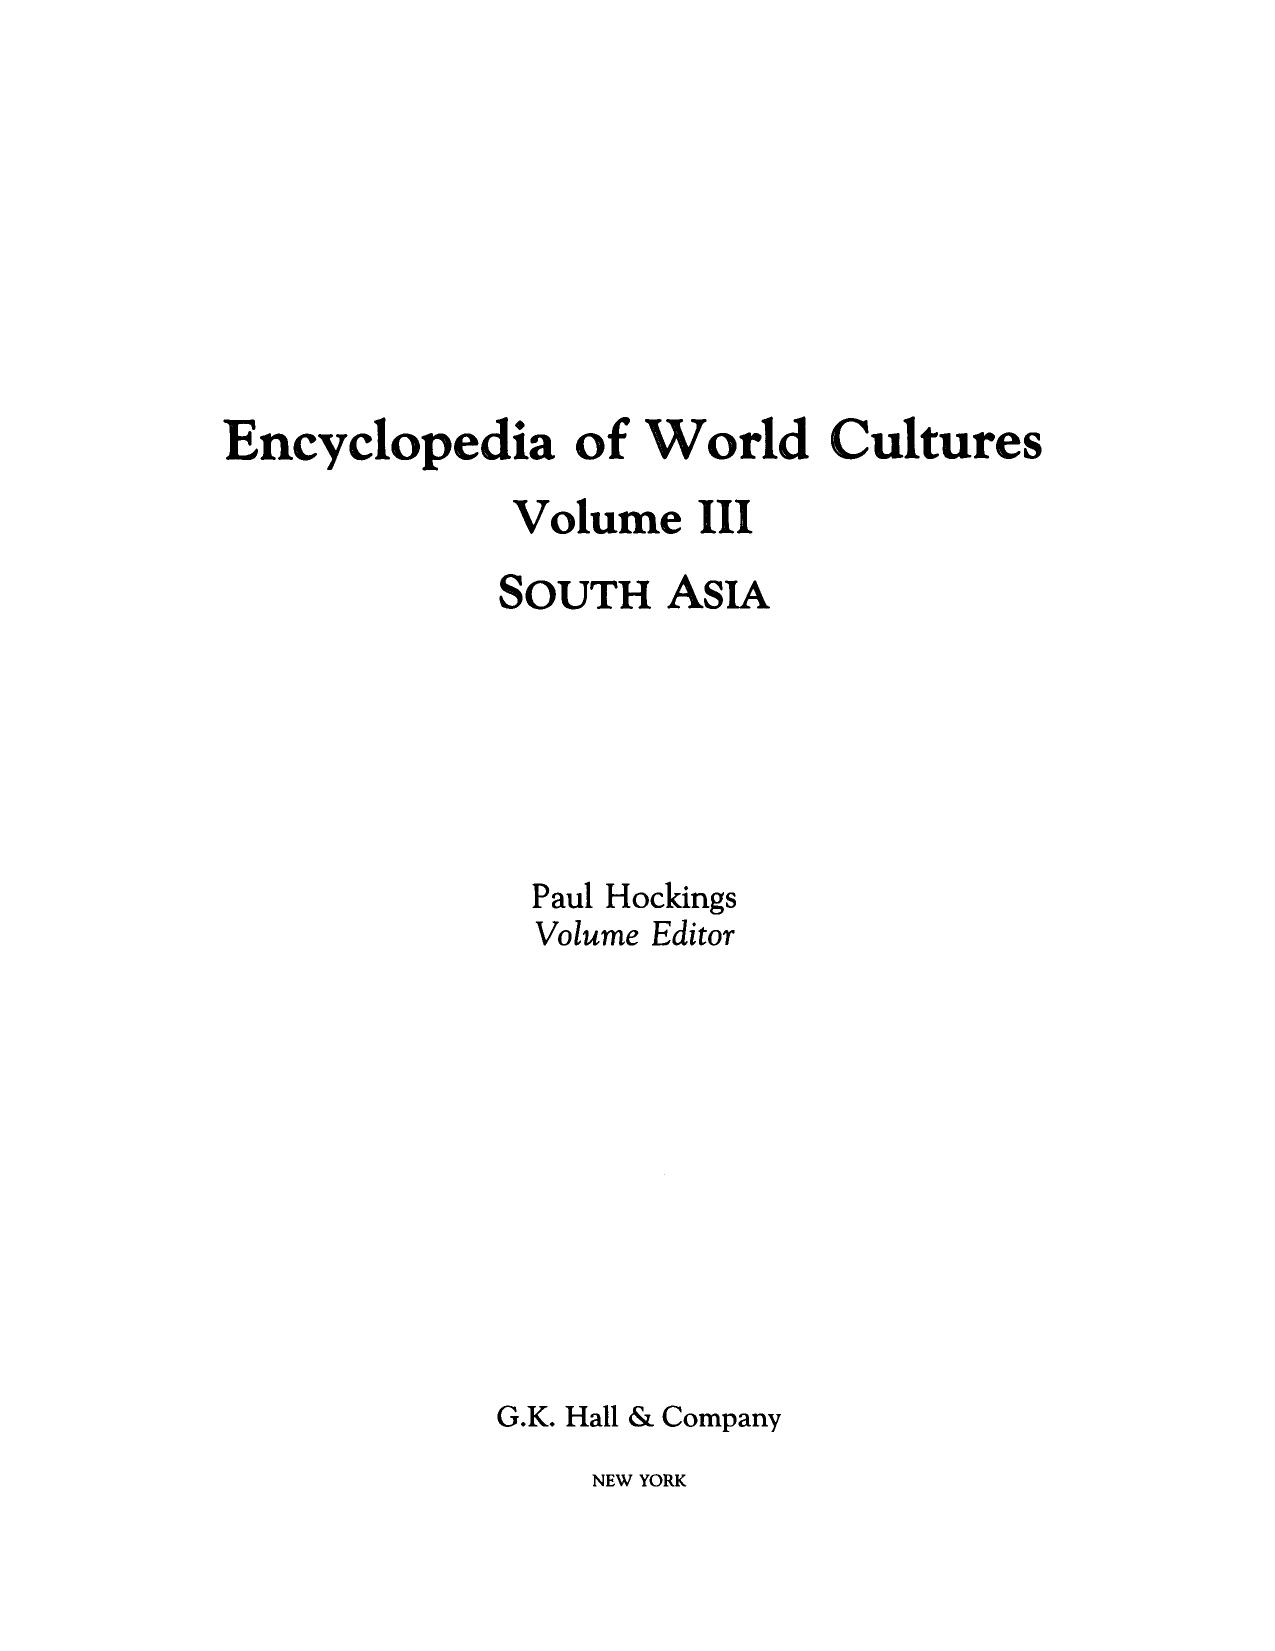 Encyclopedia of World Cultures South Asia